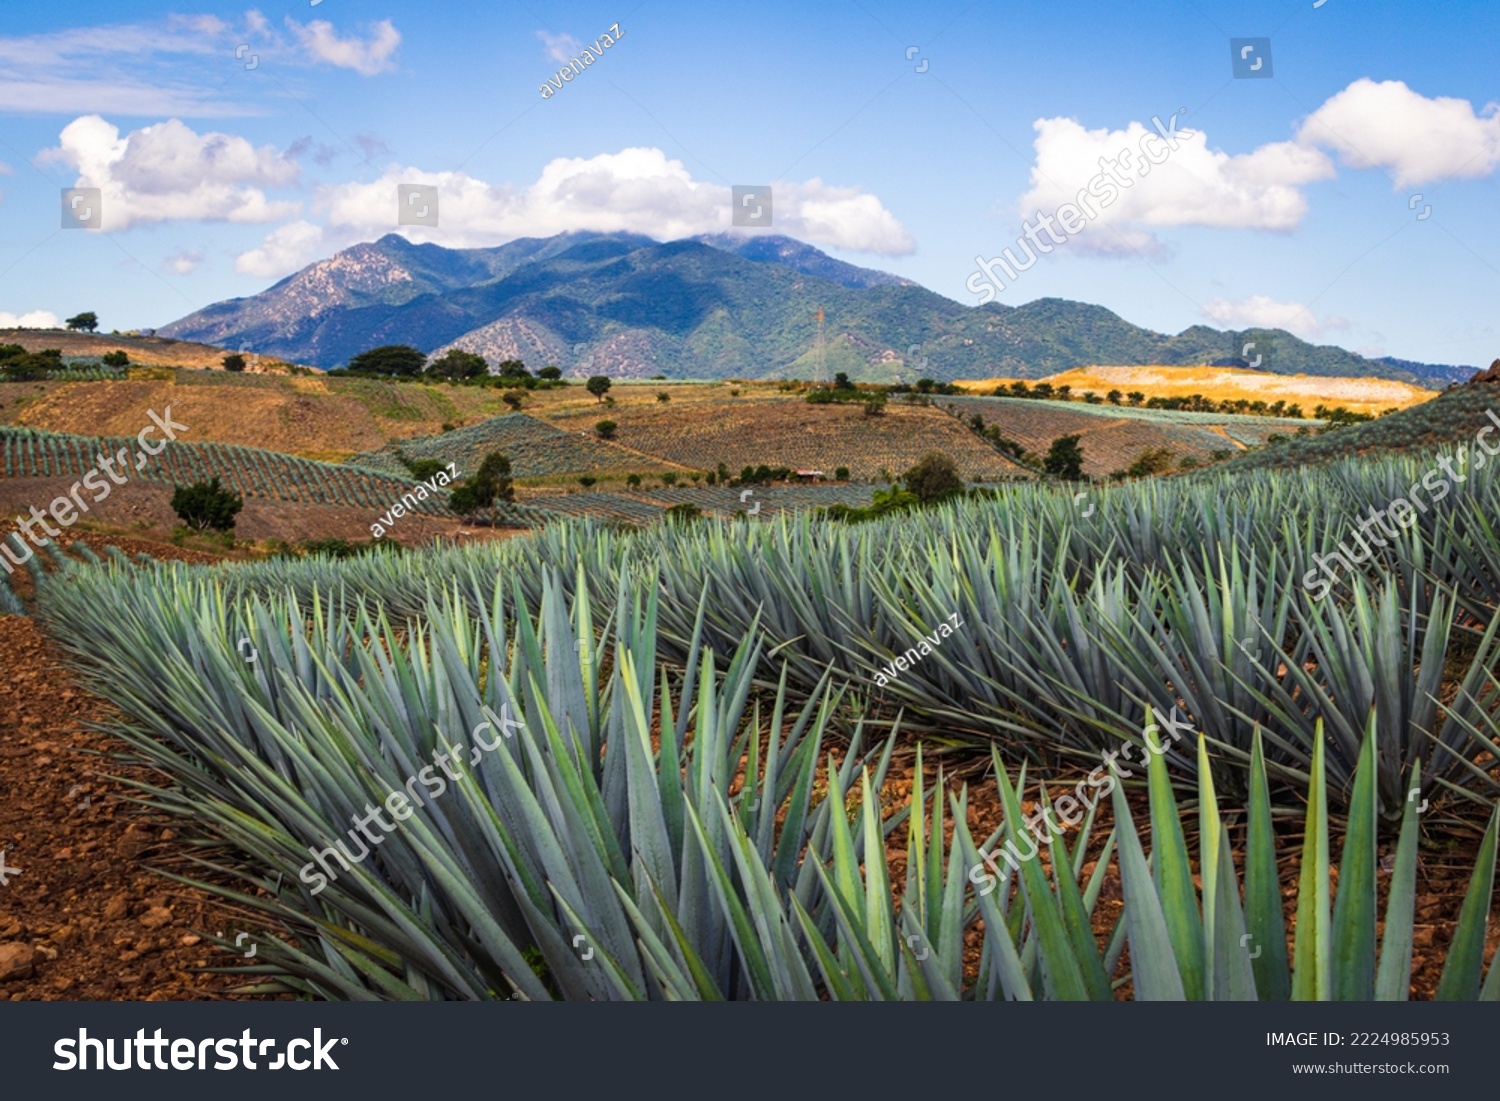 Agave fields  view in Tequila, Jalisco, Mexico. Vanishing point perspective. Colorful landscape with agave.
 #2224985953